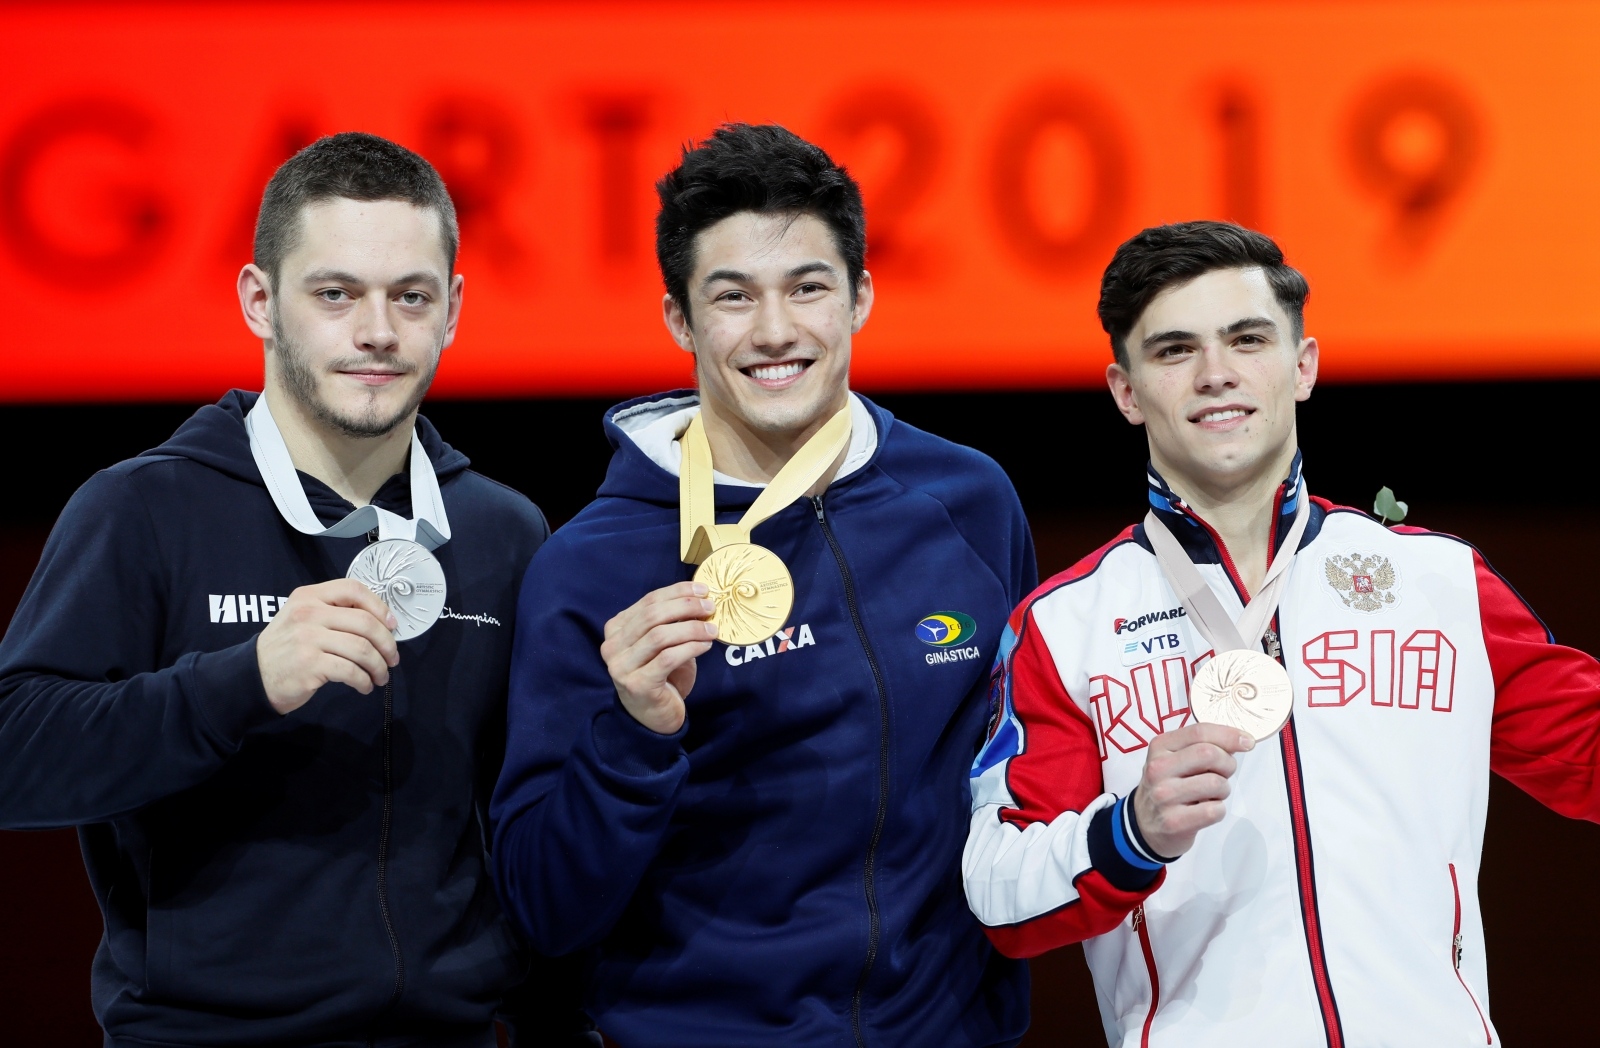 2019 World Artistic Gymnastics Championships Artistic Gymnastics - 2019 World Artistic Gymnastics Championships - Men's Horizontal Bar Final - Hanns-Martin-Schleyer-Halle, Stuttgart, Germany - October 13, 2019   Gold medalist Brazil's Arthur Mariano, silver medalist Croatia's Tin Srbic and bronze medalist Russia's Artur Dalaloyan pose as they celebrate on the podium with their medals   REUTERS/Wolfgang Rattay WOLFGANG RATTAY